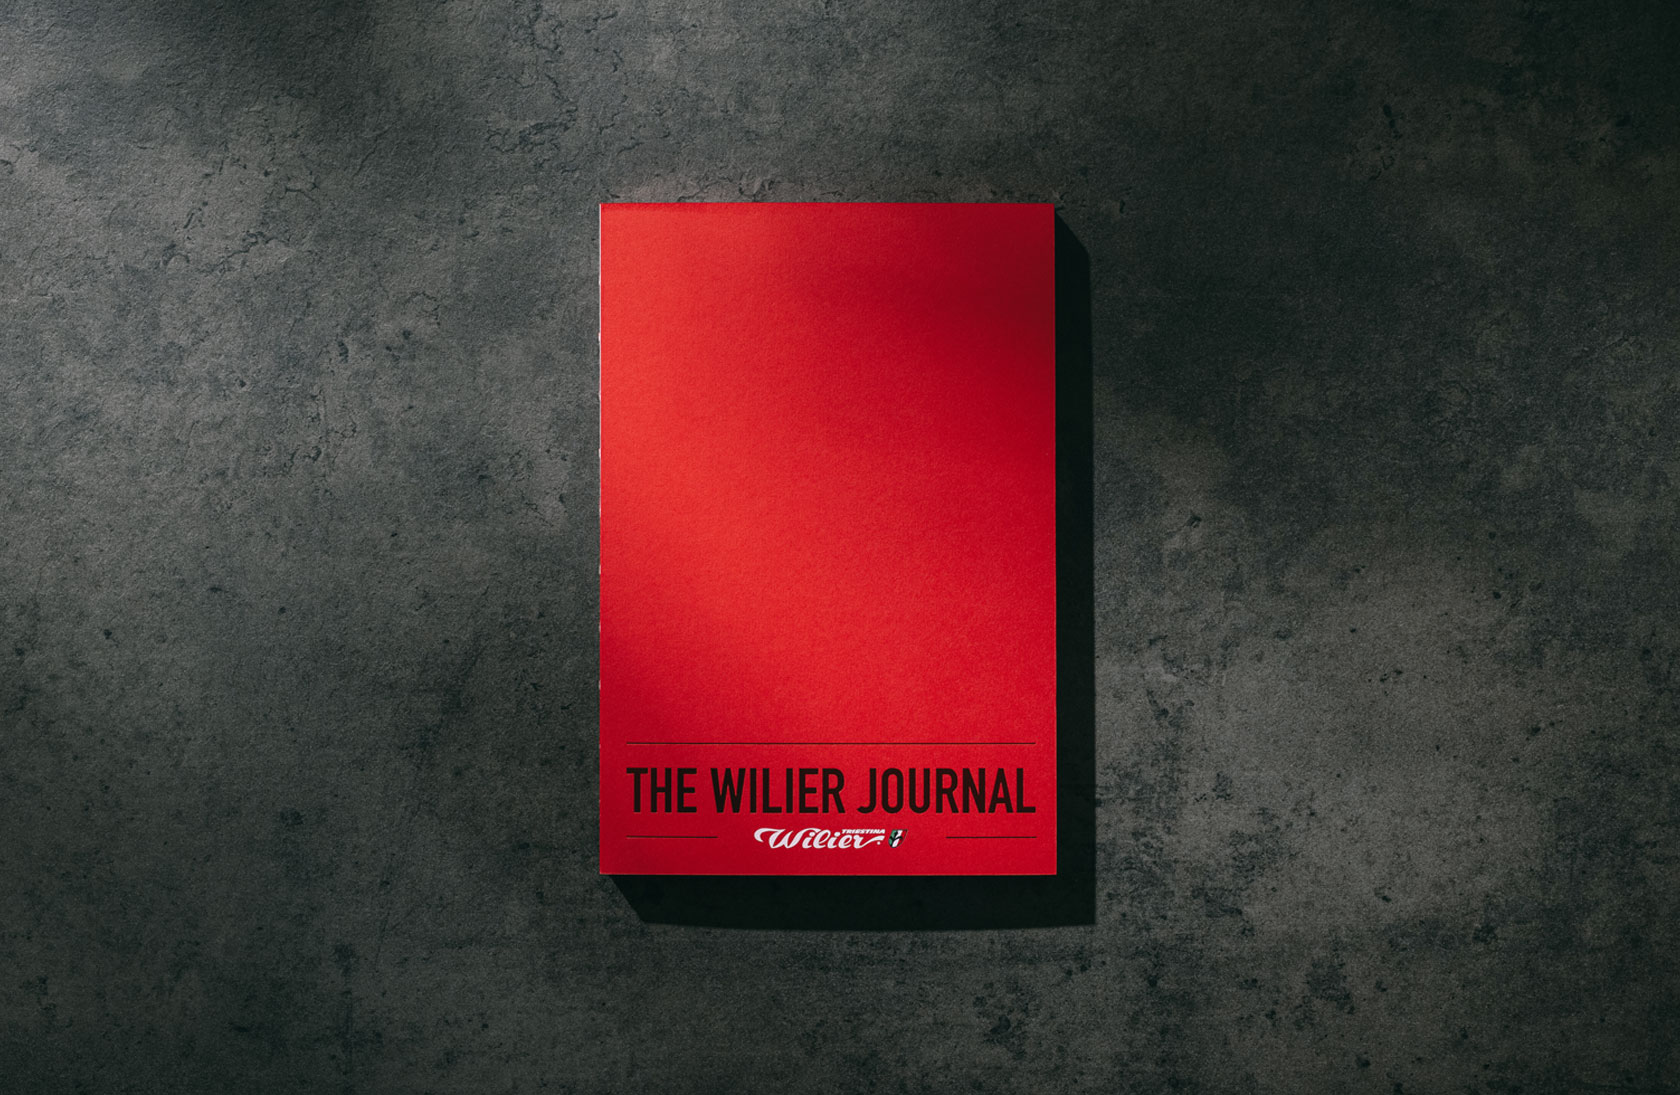 The Wilier Journal #1